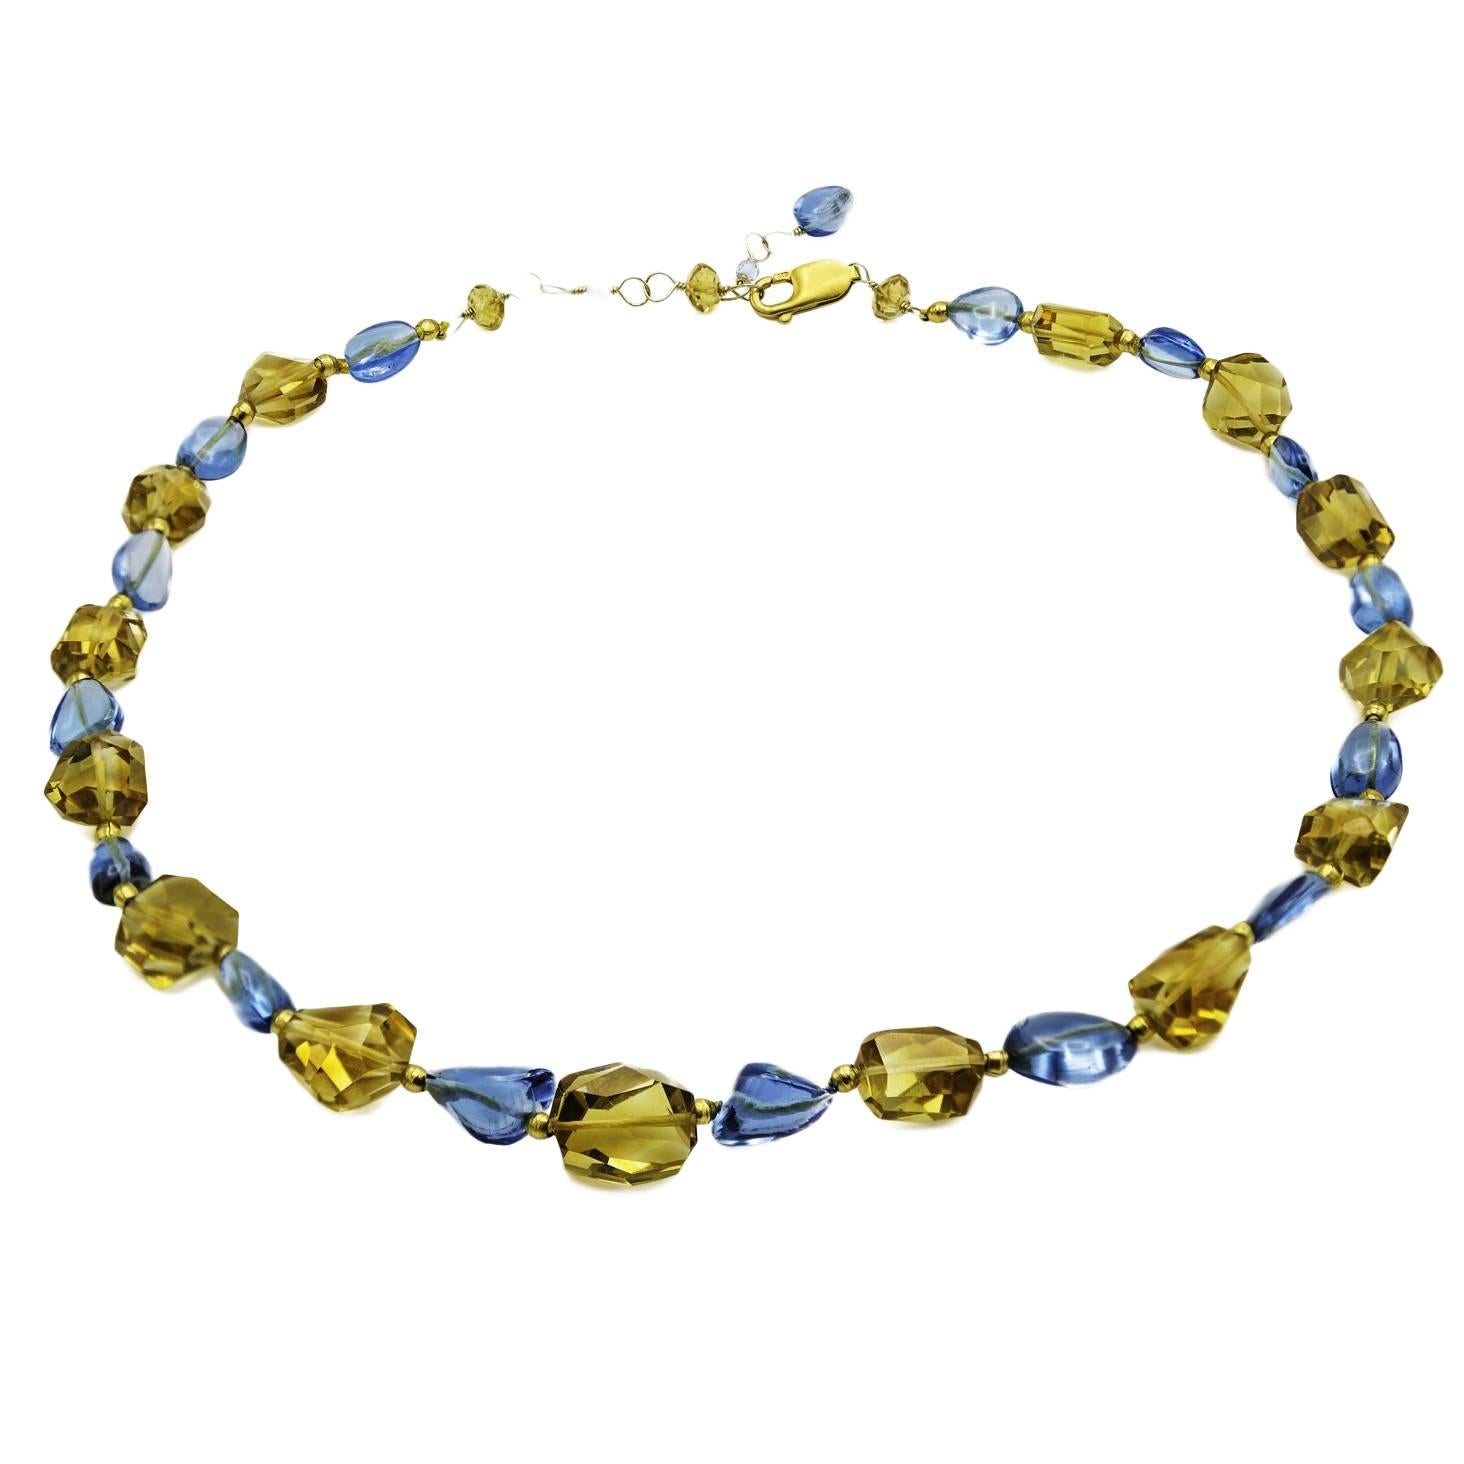 Blue Topaz Citrine Faceted Baroque Bead Necklace